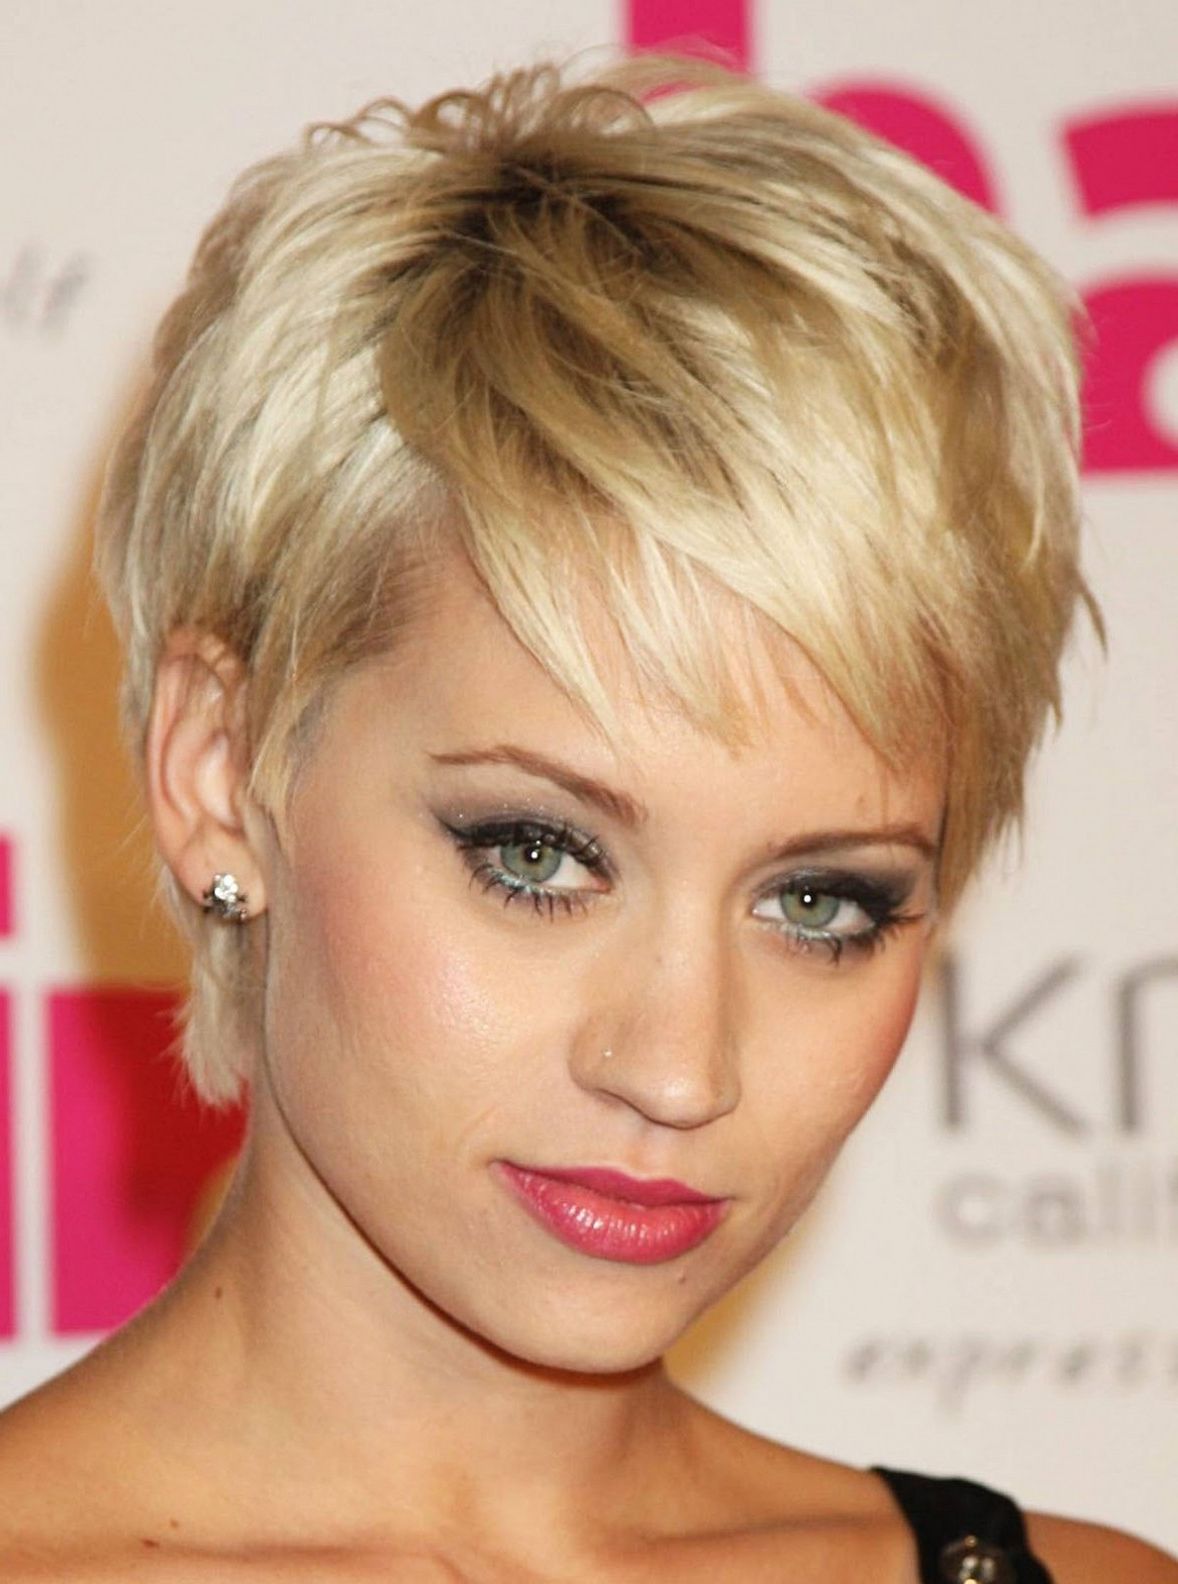 Short Hairstyles To Make You Look Younger Unique Hairstyles Top 5 With Short Haircuts To Look Younger (View 12 of 25)